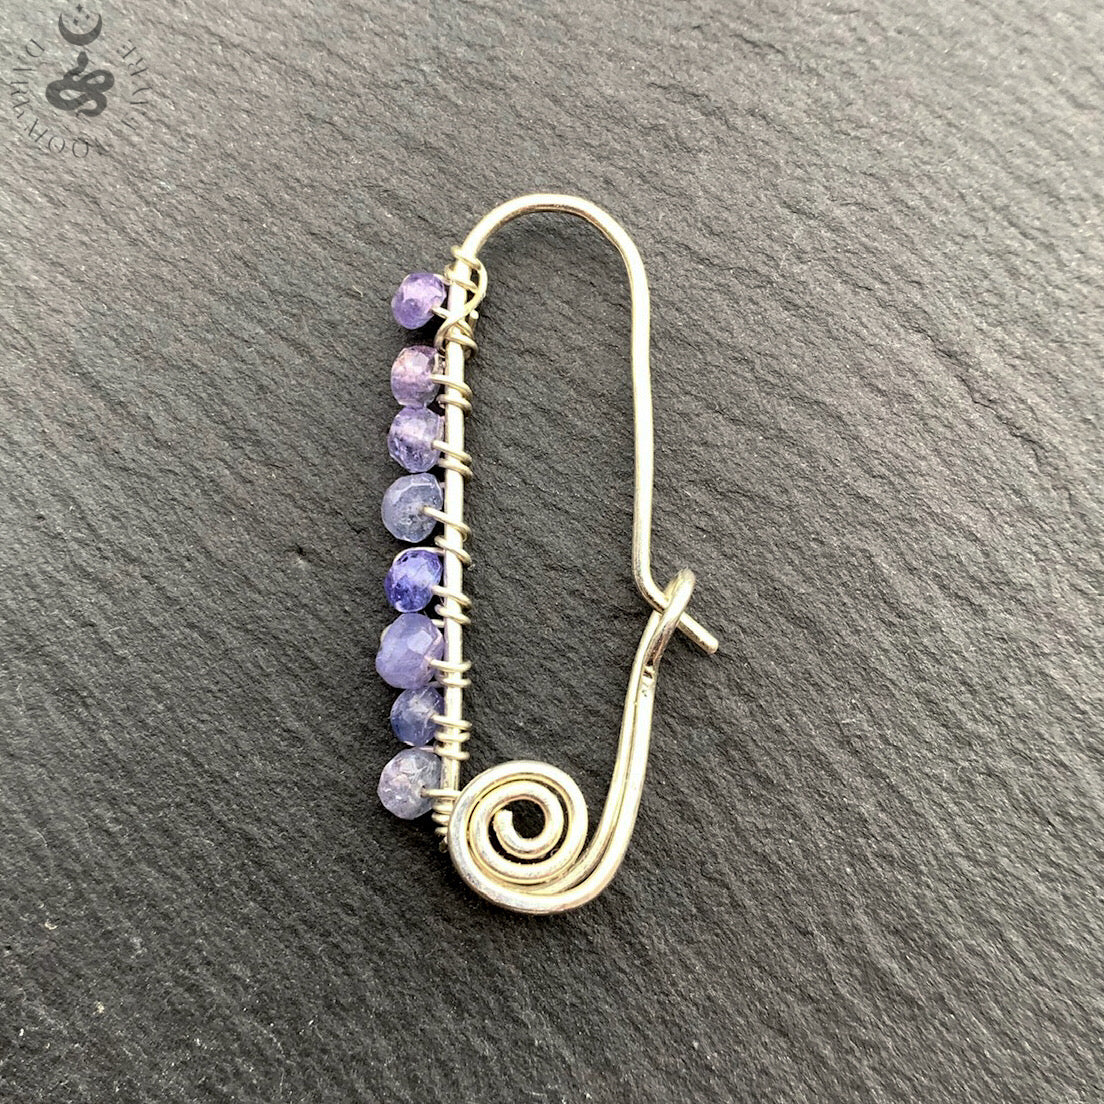 Tanzanite Safety Pin Single Earring In All 925 Sterling Silver Hand Forged Wire - Darkmoon Fayre